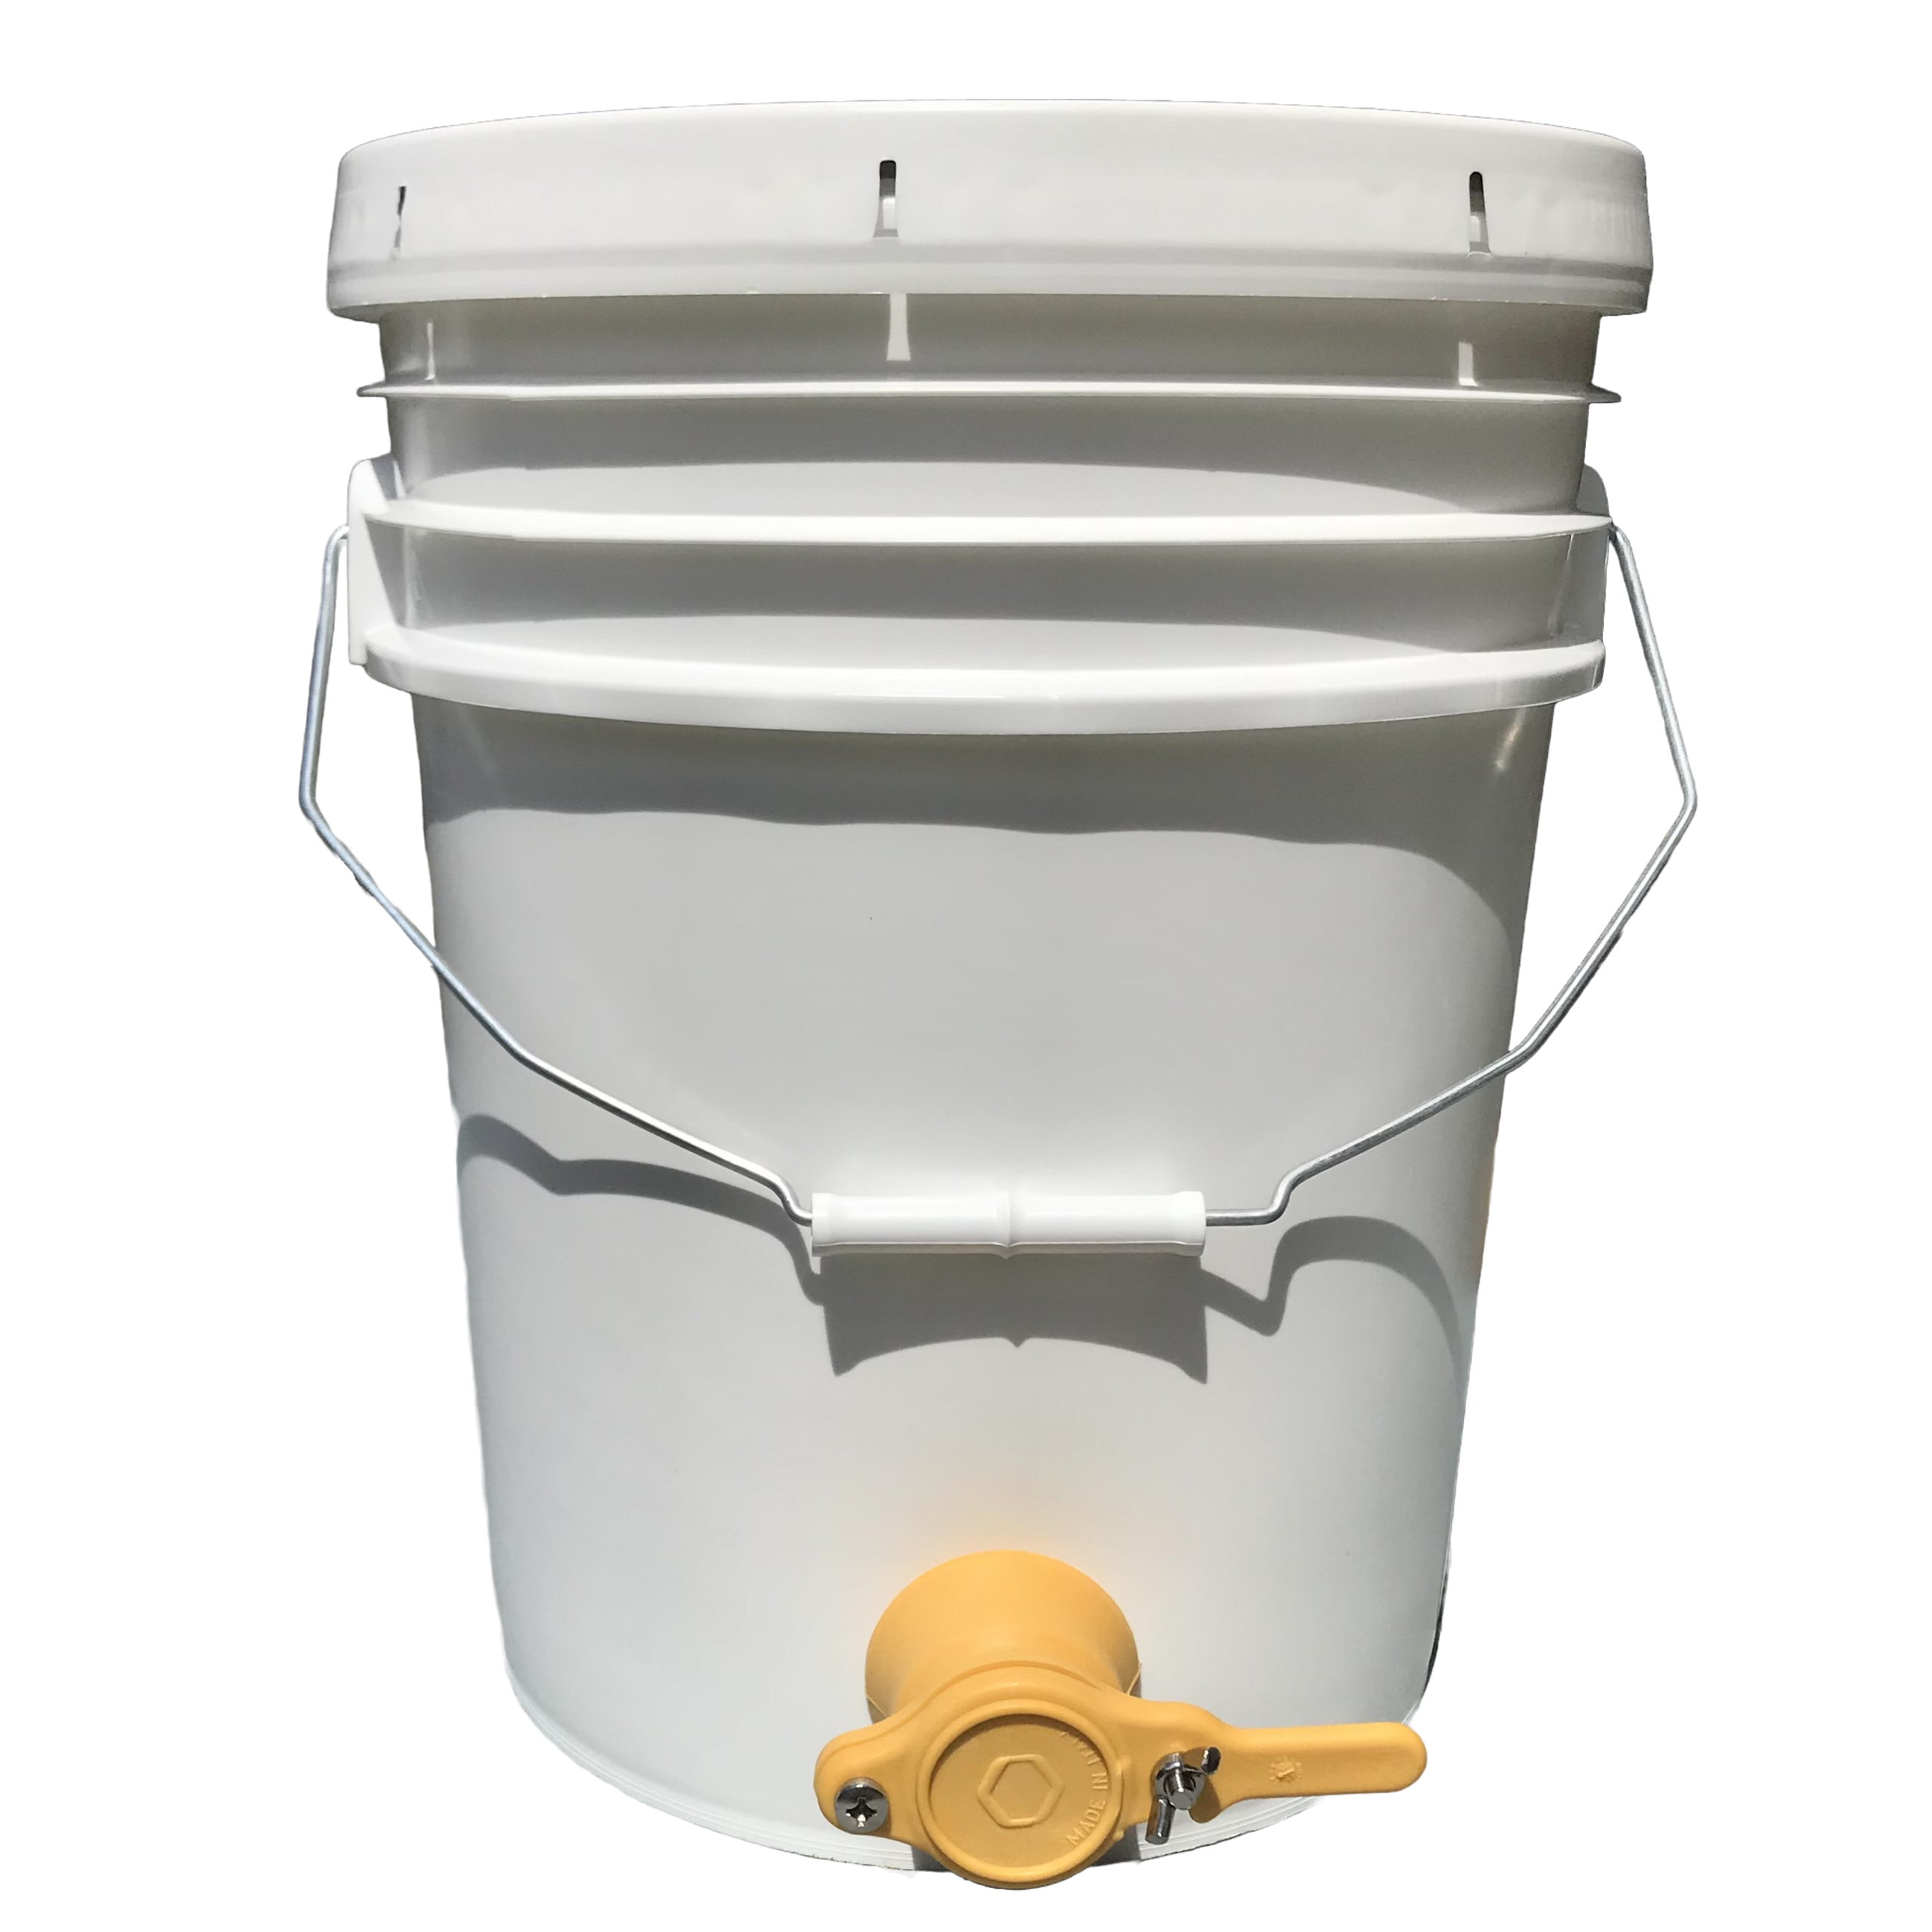 5 Gallon Pail with Standard Lid and Gate Spout – Let It Bee Inc